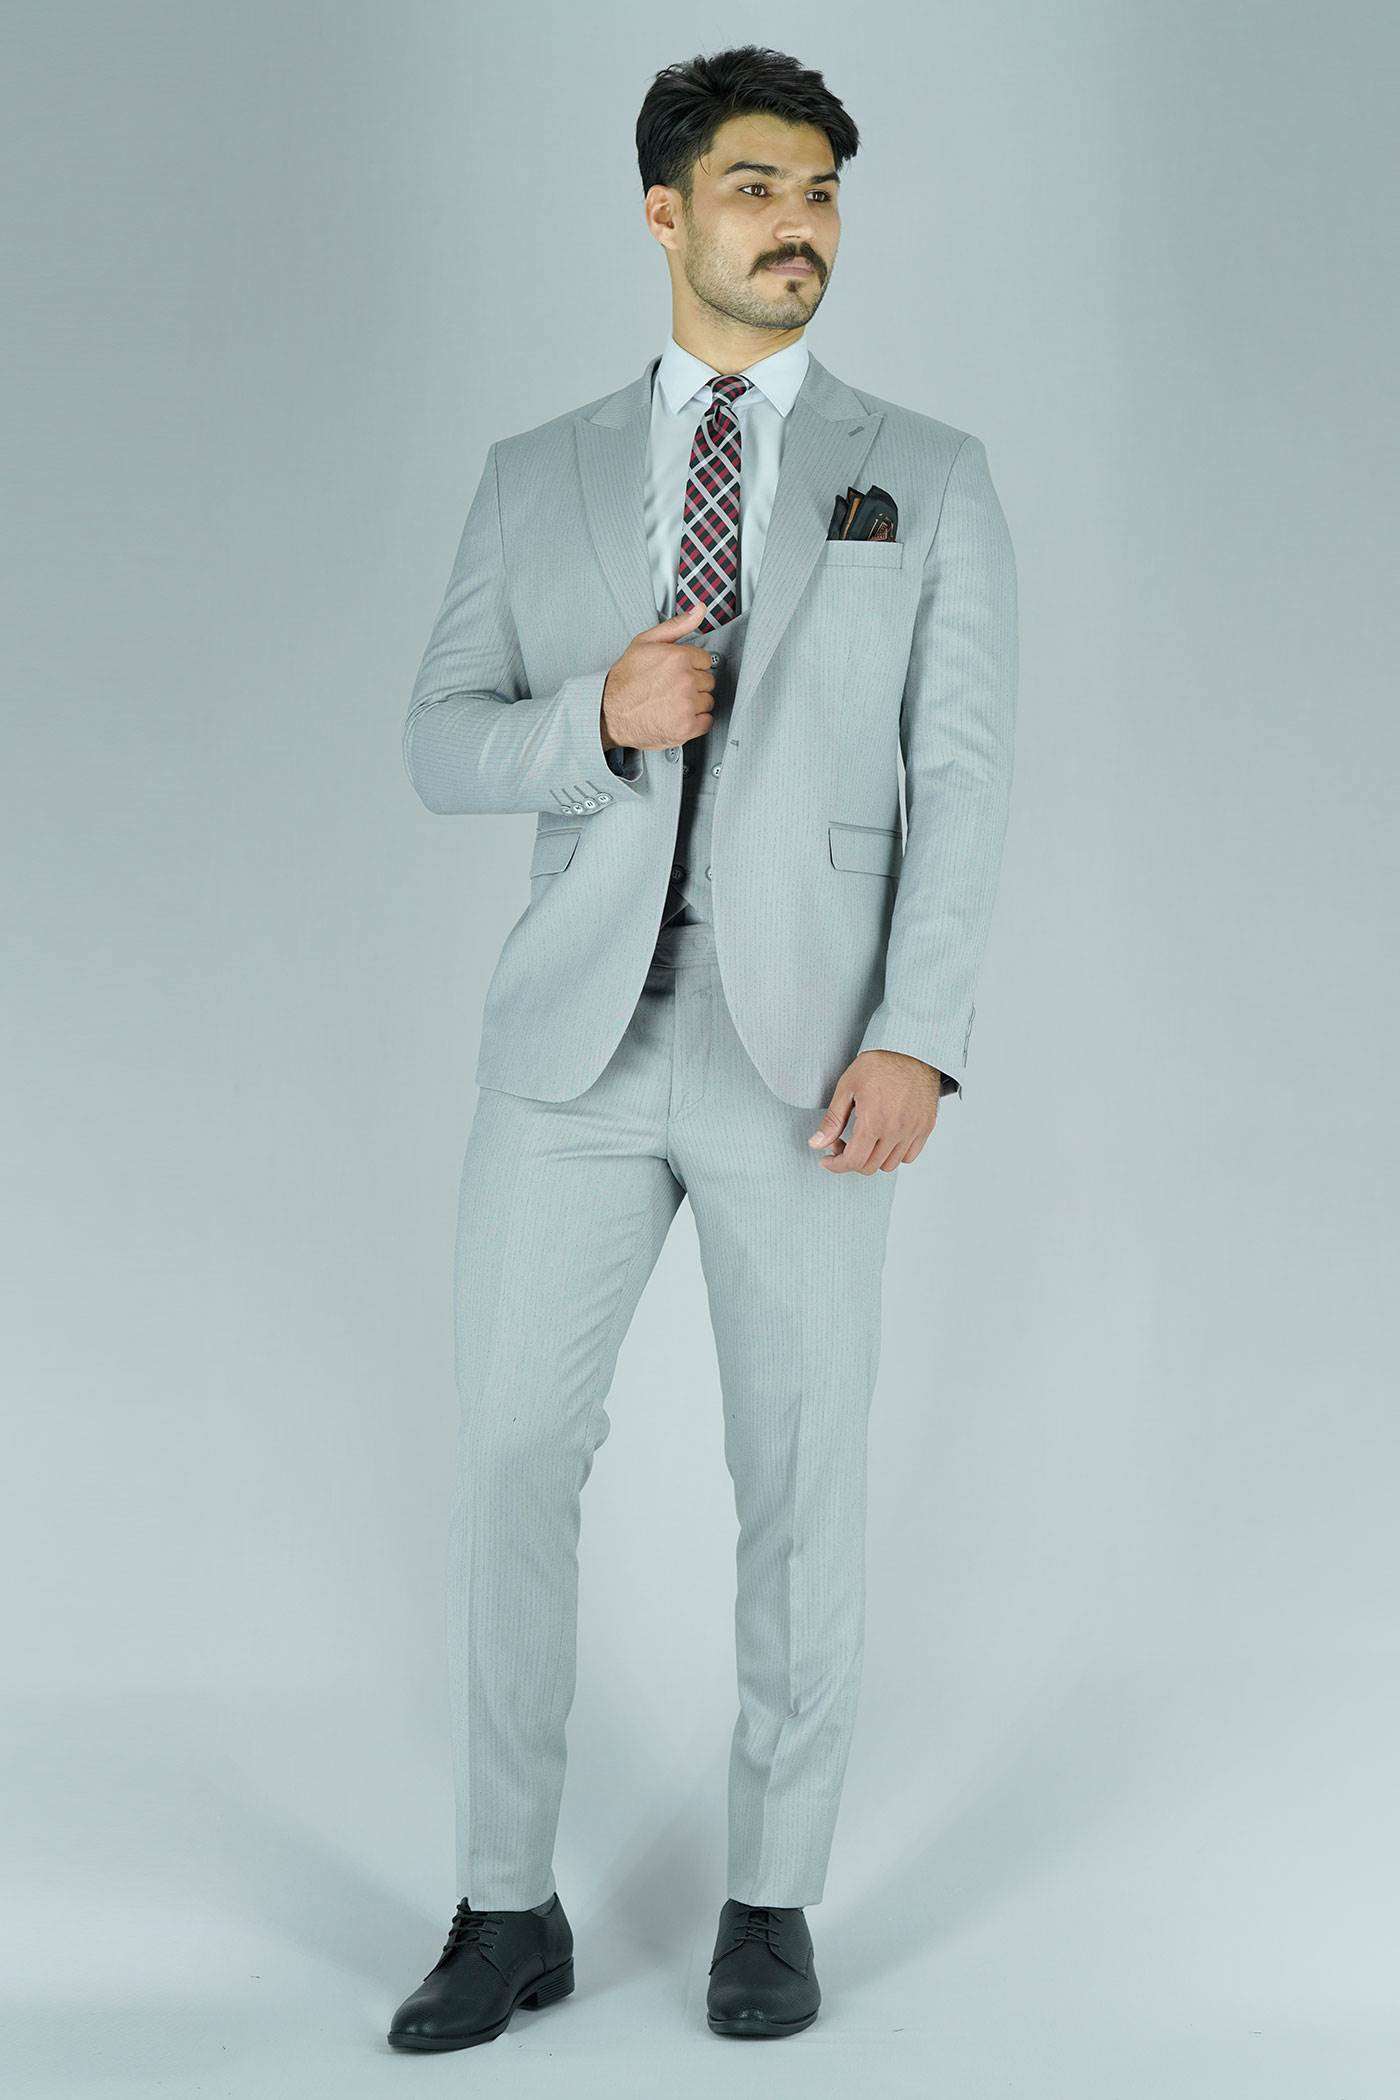 Mens striped suit faded